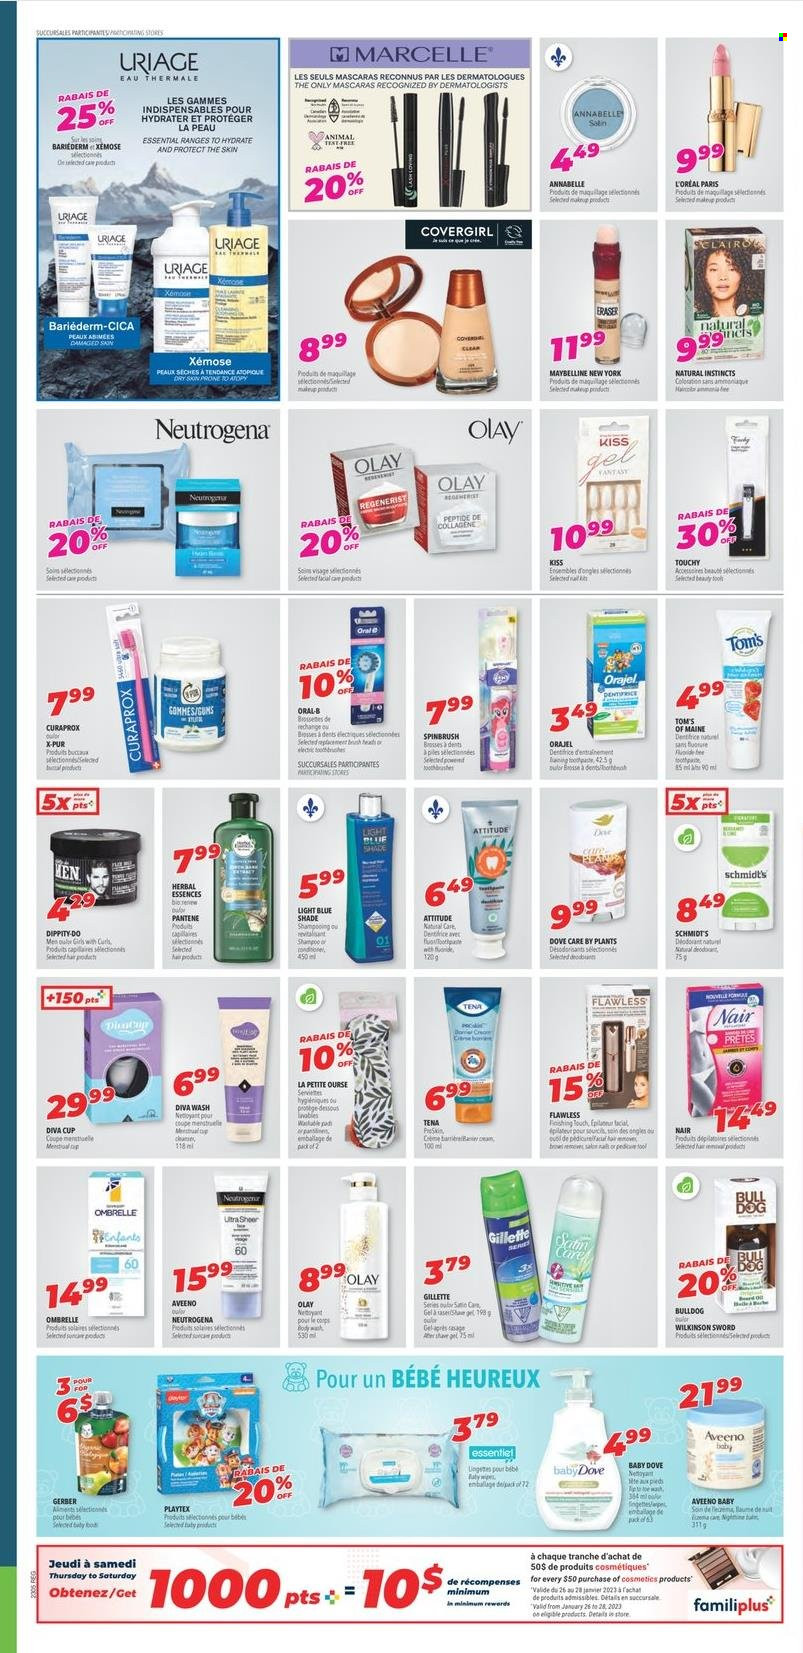 thumbnail - Familiprix Flyer - January 26, 2023 - February 01, 2023 - Sales products - Dove, Gerber, oil, Aveeno, Playtex, Gillette, L’Oréal, Olay, beard oil, Pantene, Herbal Essences, makeup, Maybelline, Neutrogena, shampoo, Oral-B. Page 3.